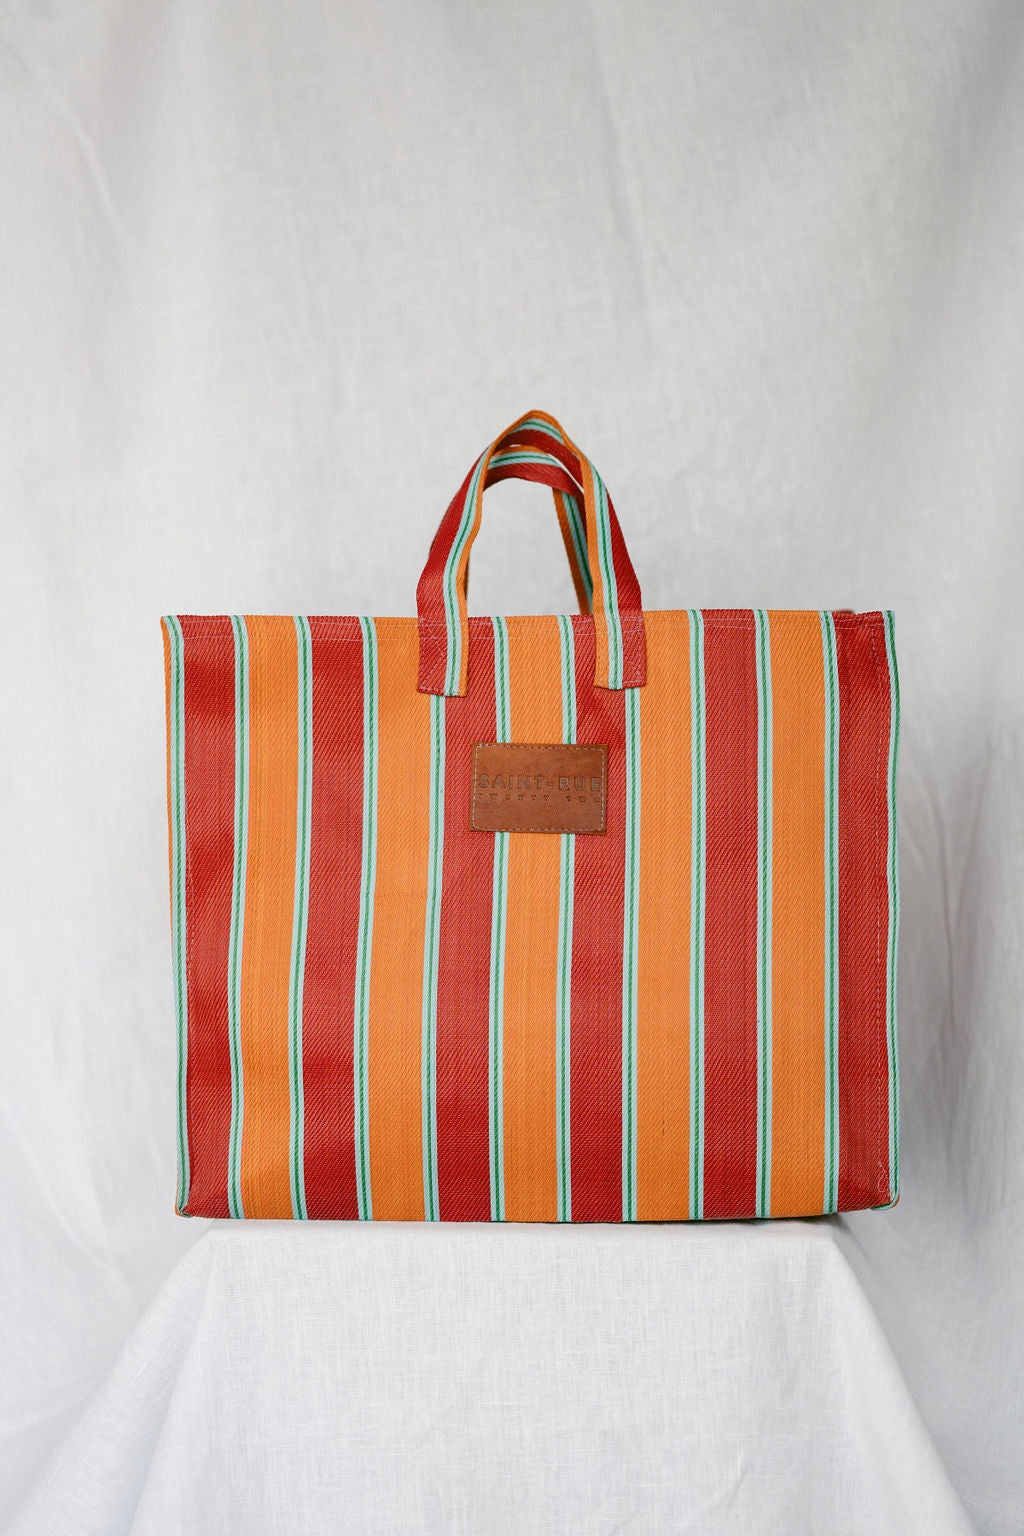 Saint Rue 22 Large Tote - Orange and Red